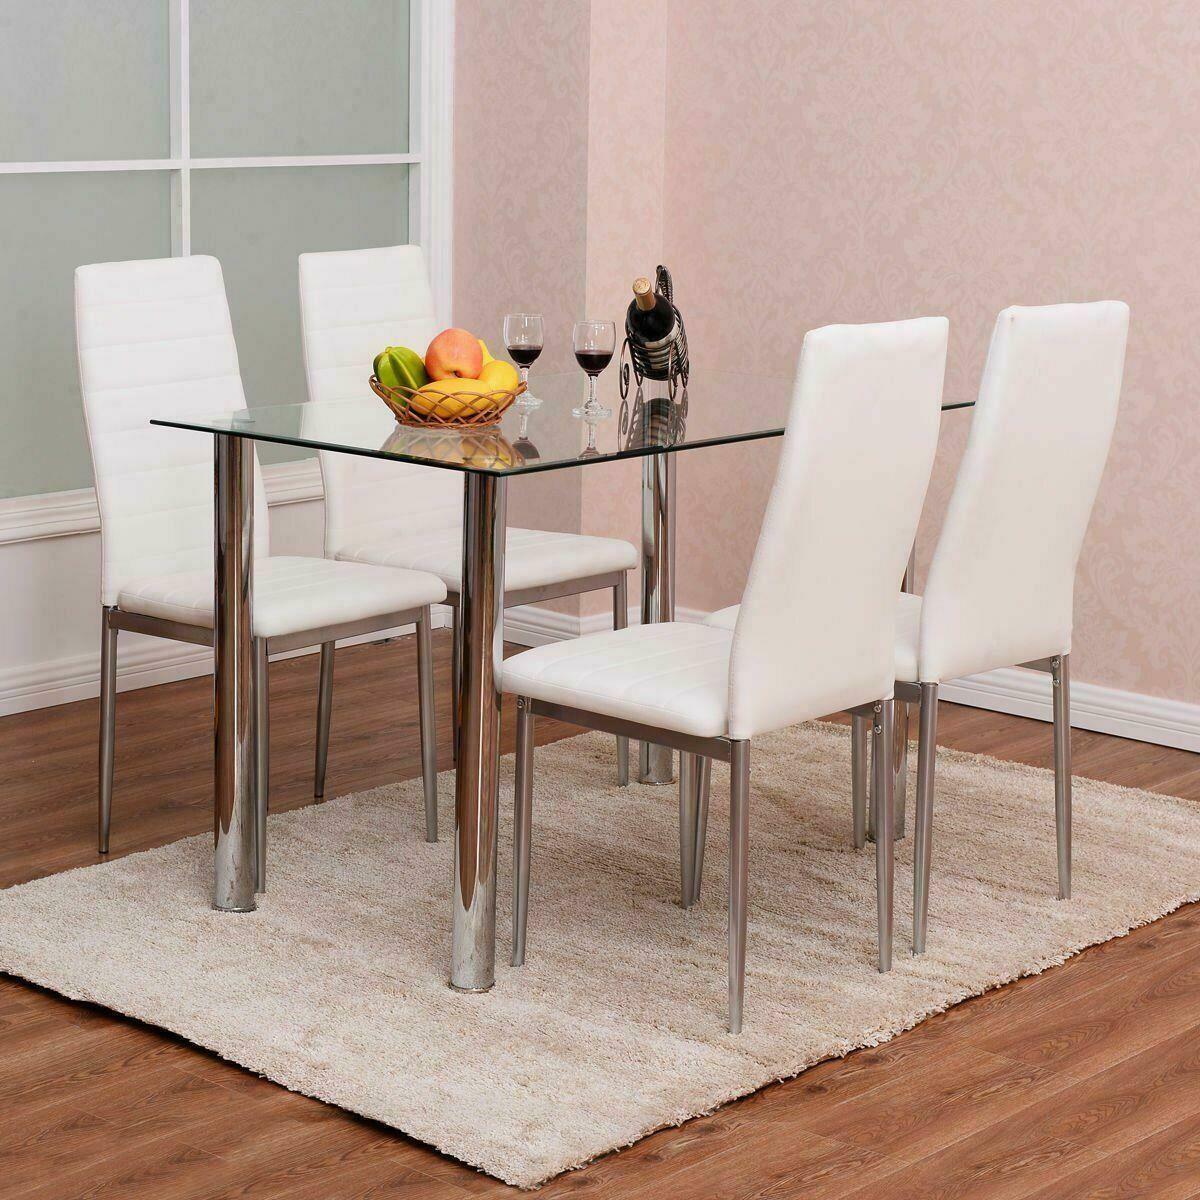 5 Piece Dining Set White Glass Table Four Faux Leather Chairs